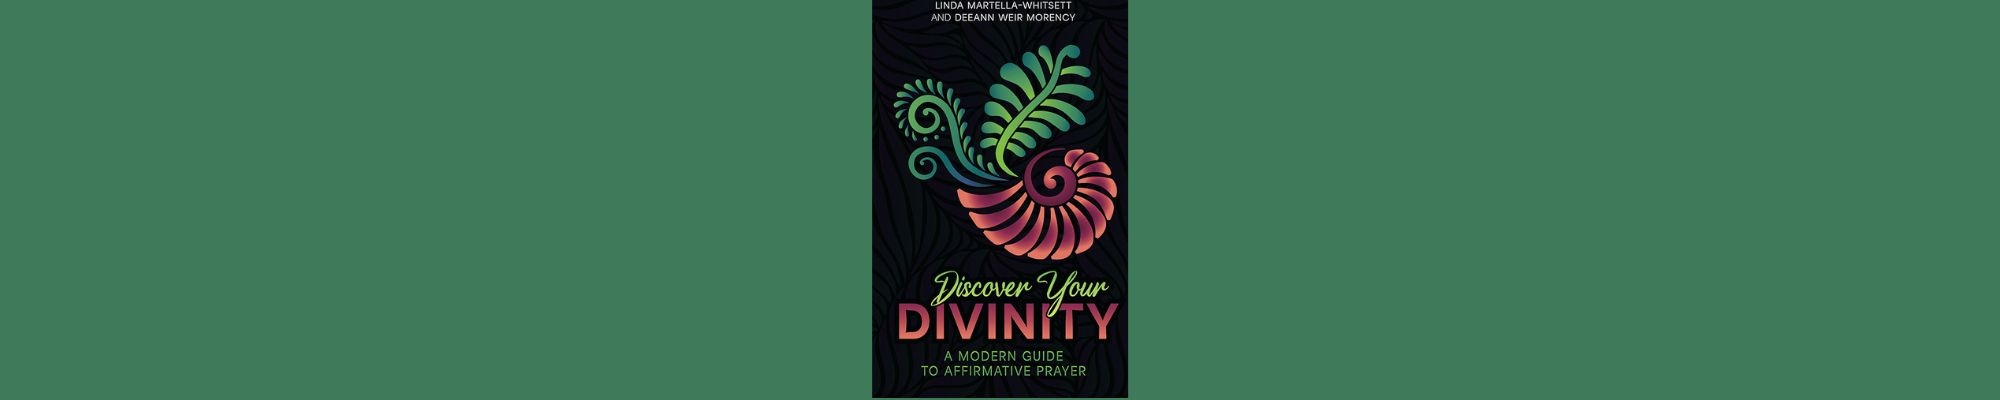 Book cover - DISCOVER YOUR DIVINITY